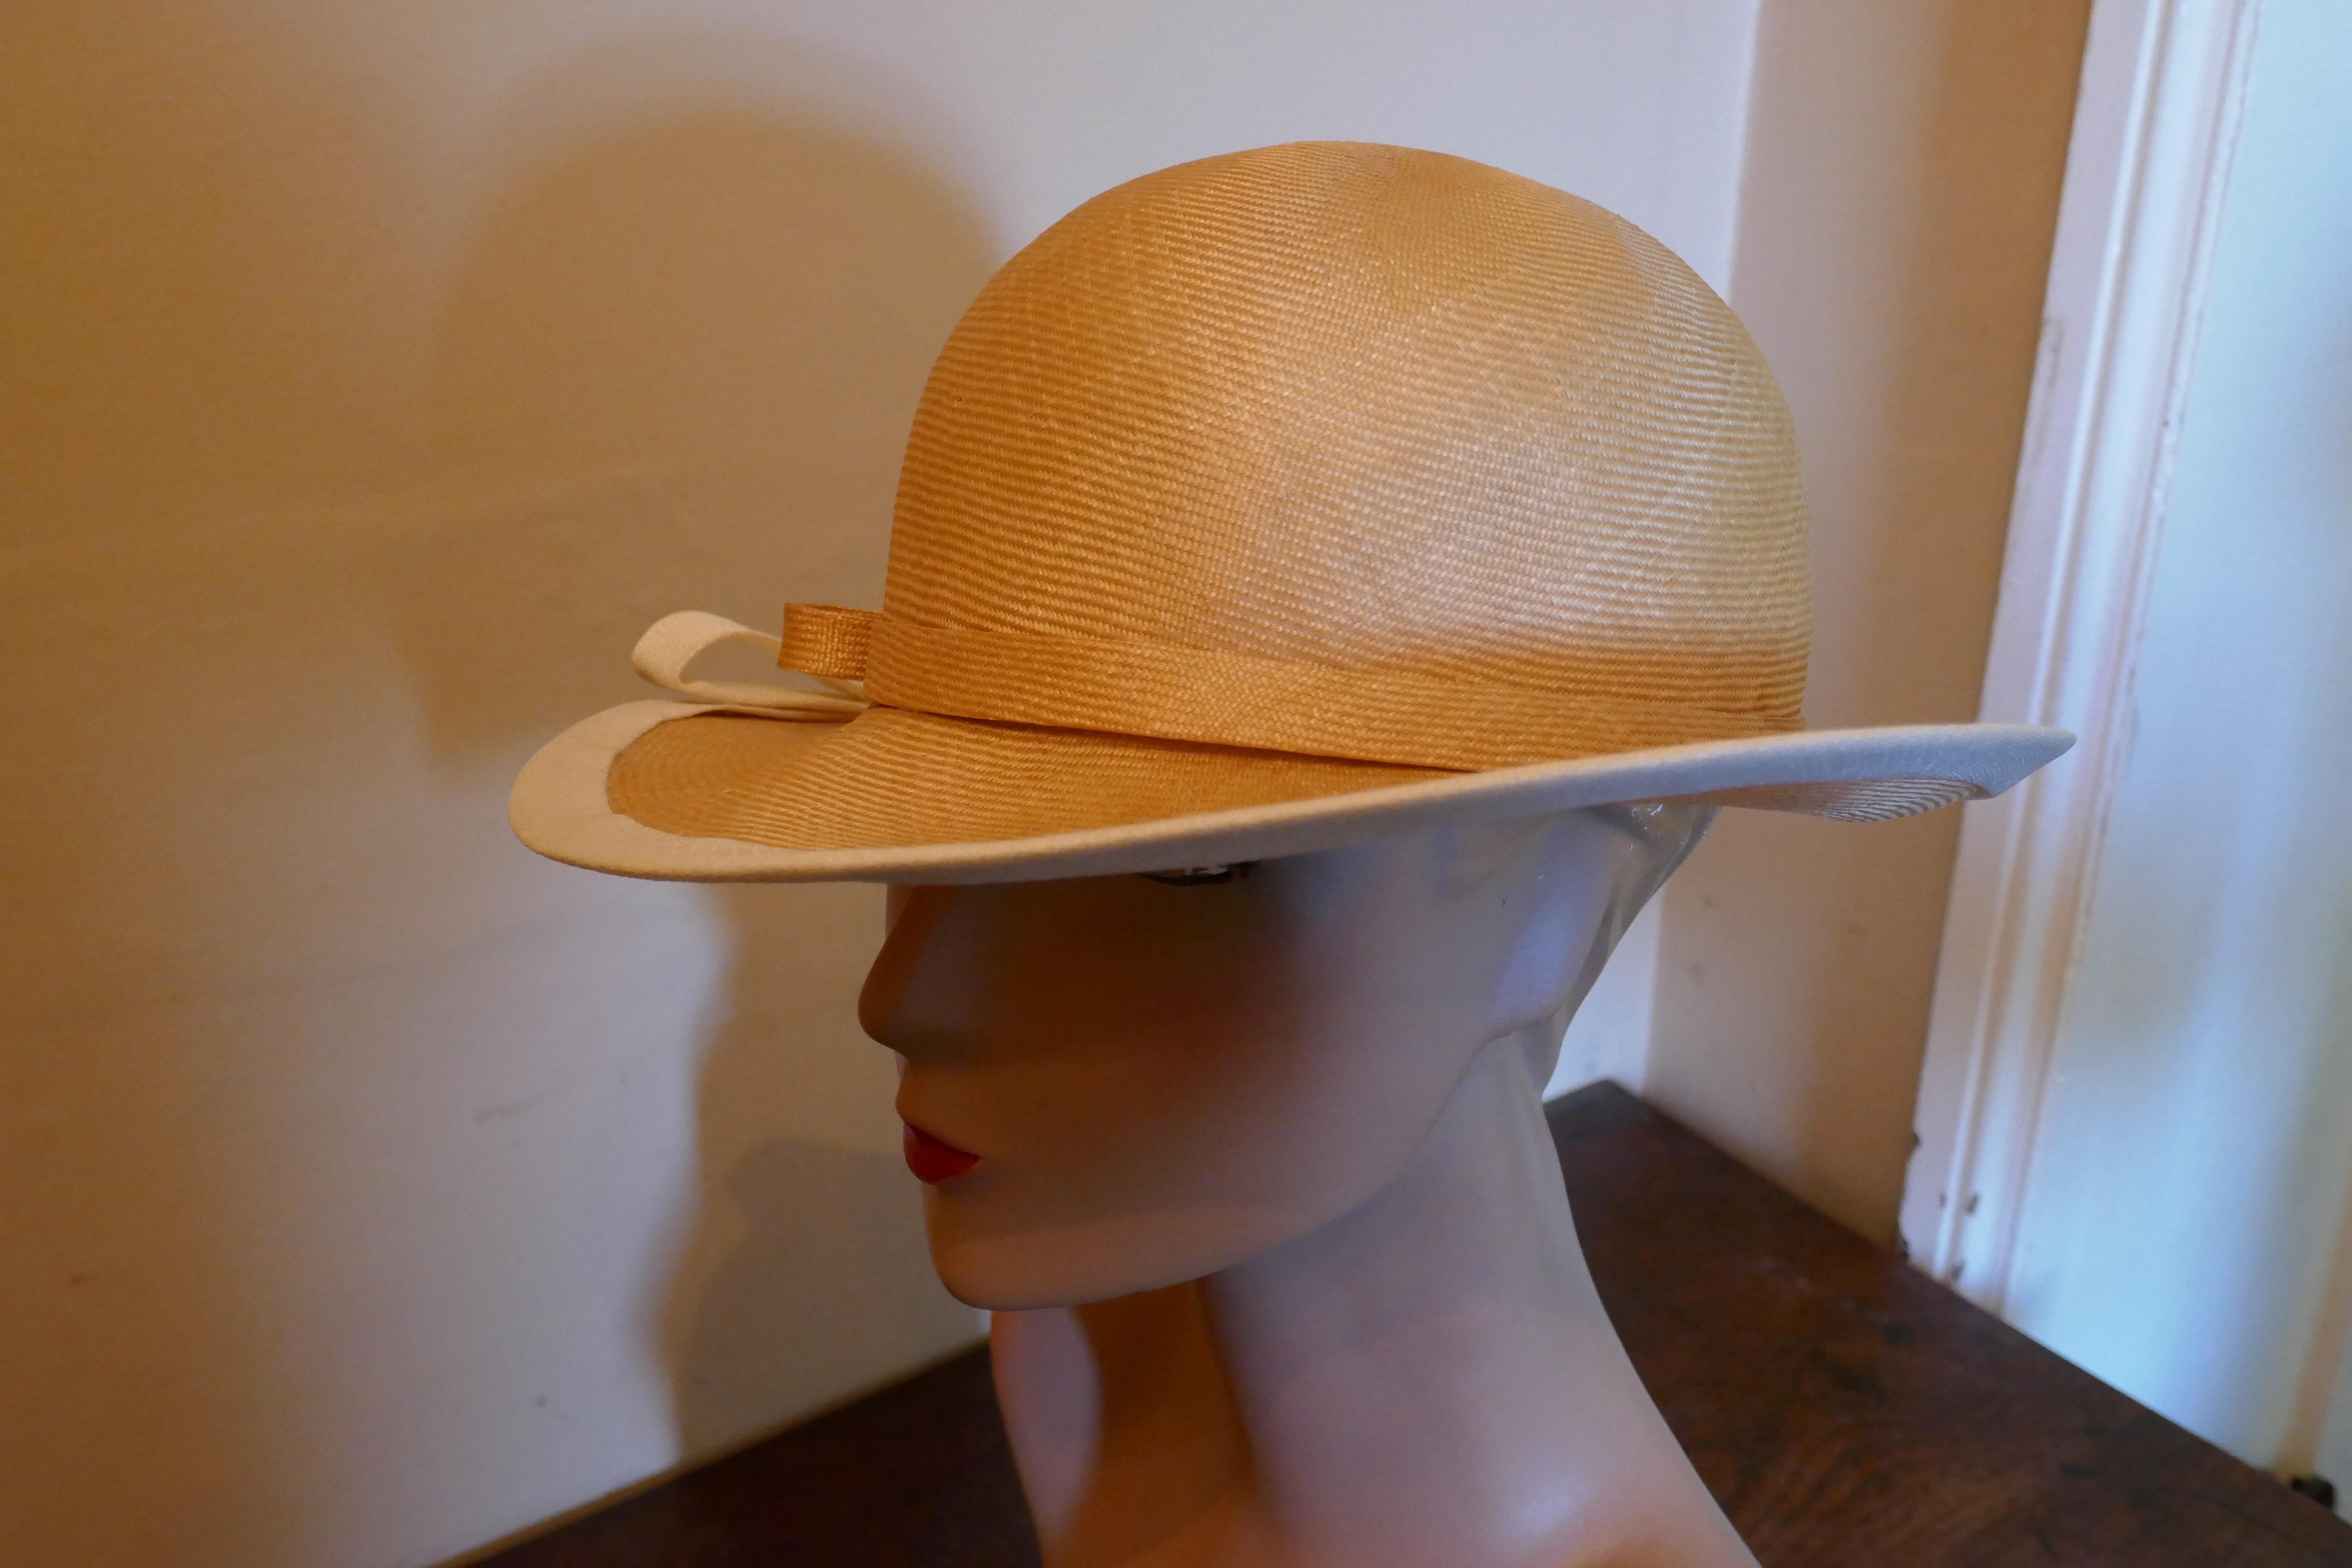 Original 1960s Designer Panama Style Hat, by Edna Wallace

This gorgeous Hat is very light and made with fine shiny stiffened straw, it has matching hat band and a white trim to the brim both with bows

This one is an exquisite design wear it